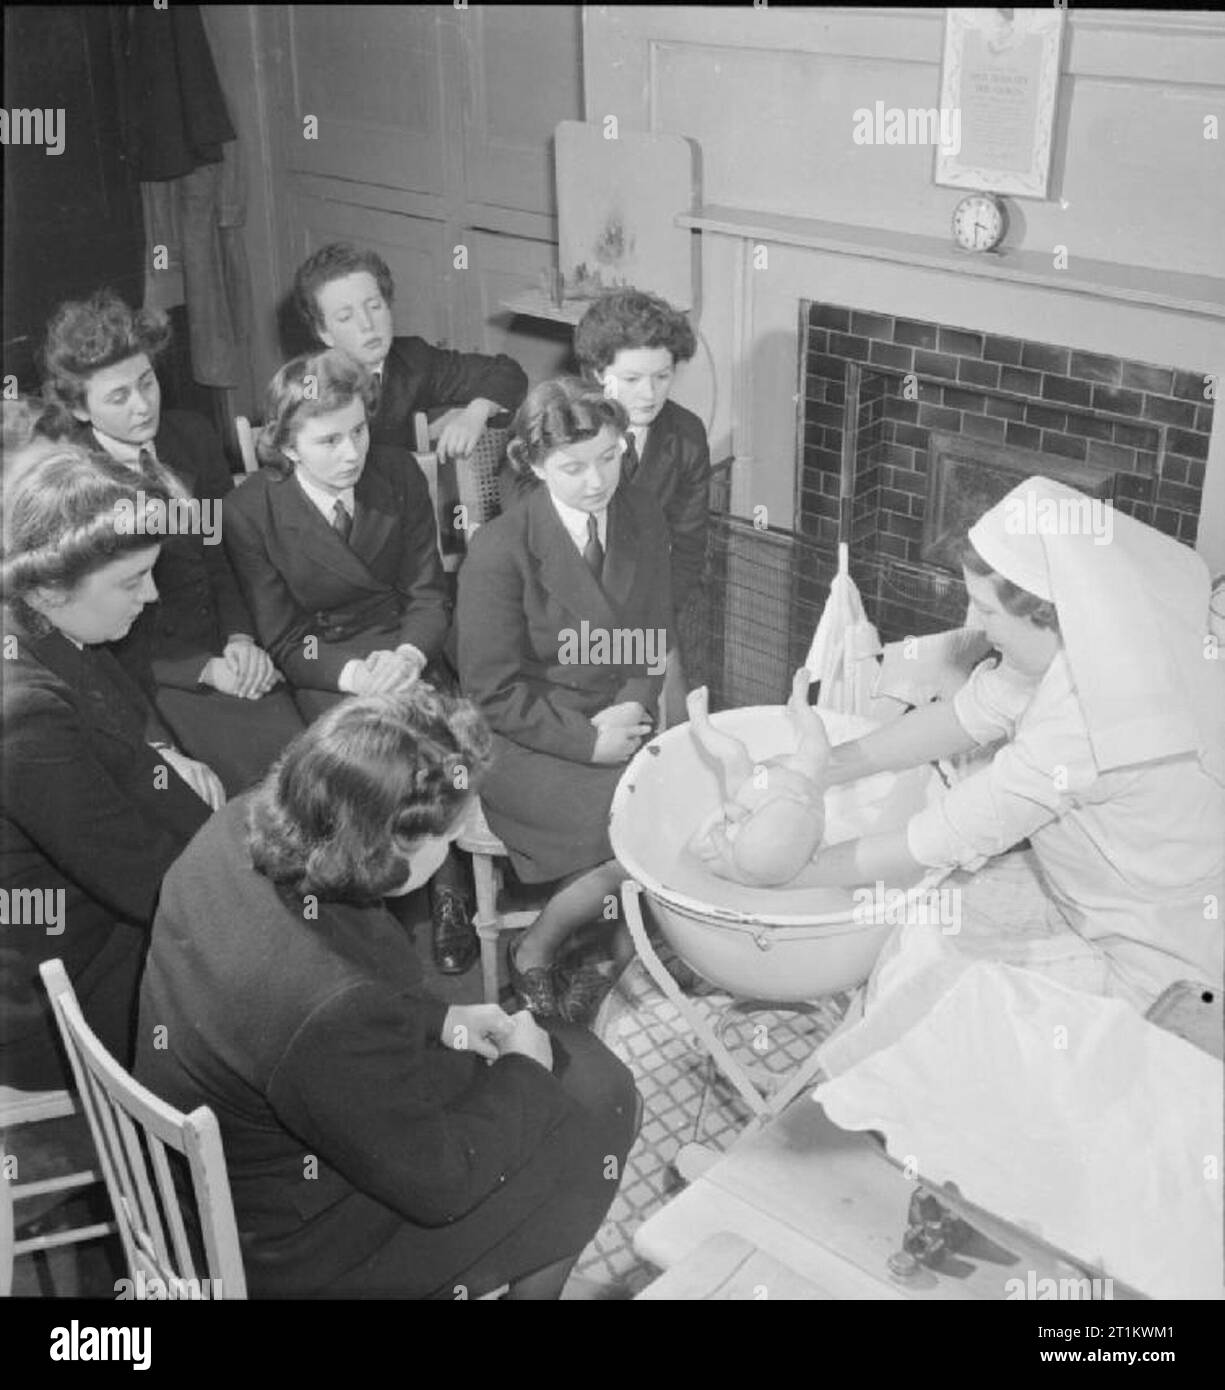 Wrens Learn Mothercraft- Members of the Women's Royal Naval Service Receive Training From the Mothercraft Training Society, London, England, UK, 1945 A group of women of the WRNS receive a lesson in bathing a baby from Matron Miss Maslen-Jones of the Mothercraft Training Society, probably at the MTS headquarters in Highgate, London. The original caption describes the correct way to bath a baby as follows: 'The baby is uncovered and soaped thoroughly going well into the creases, and then lifted straight into the bath. Soap is never used on baby's face and the head is always washed over the bath Stock Photo